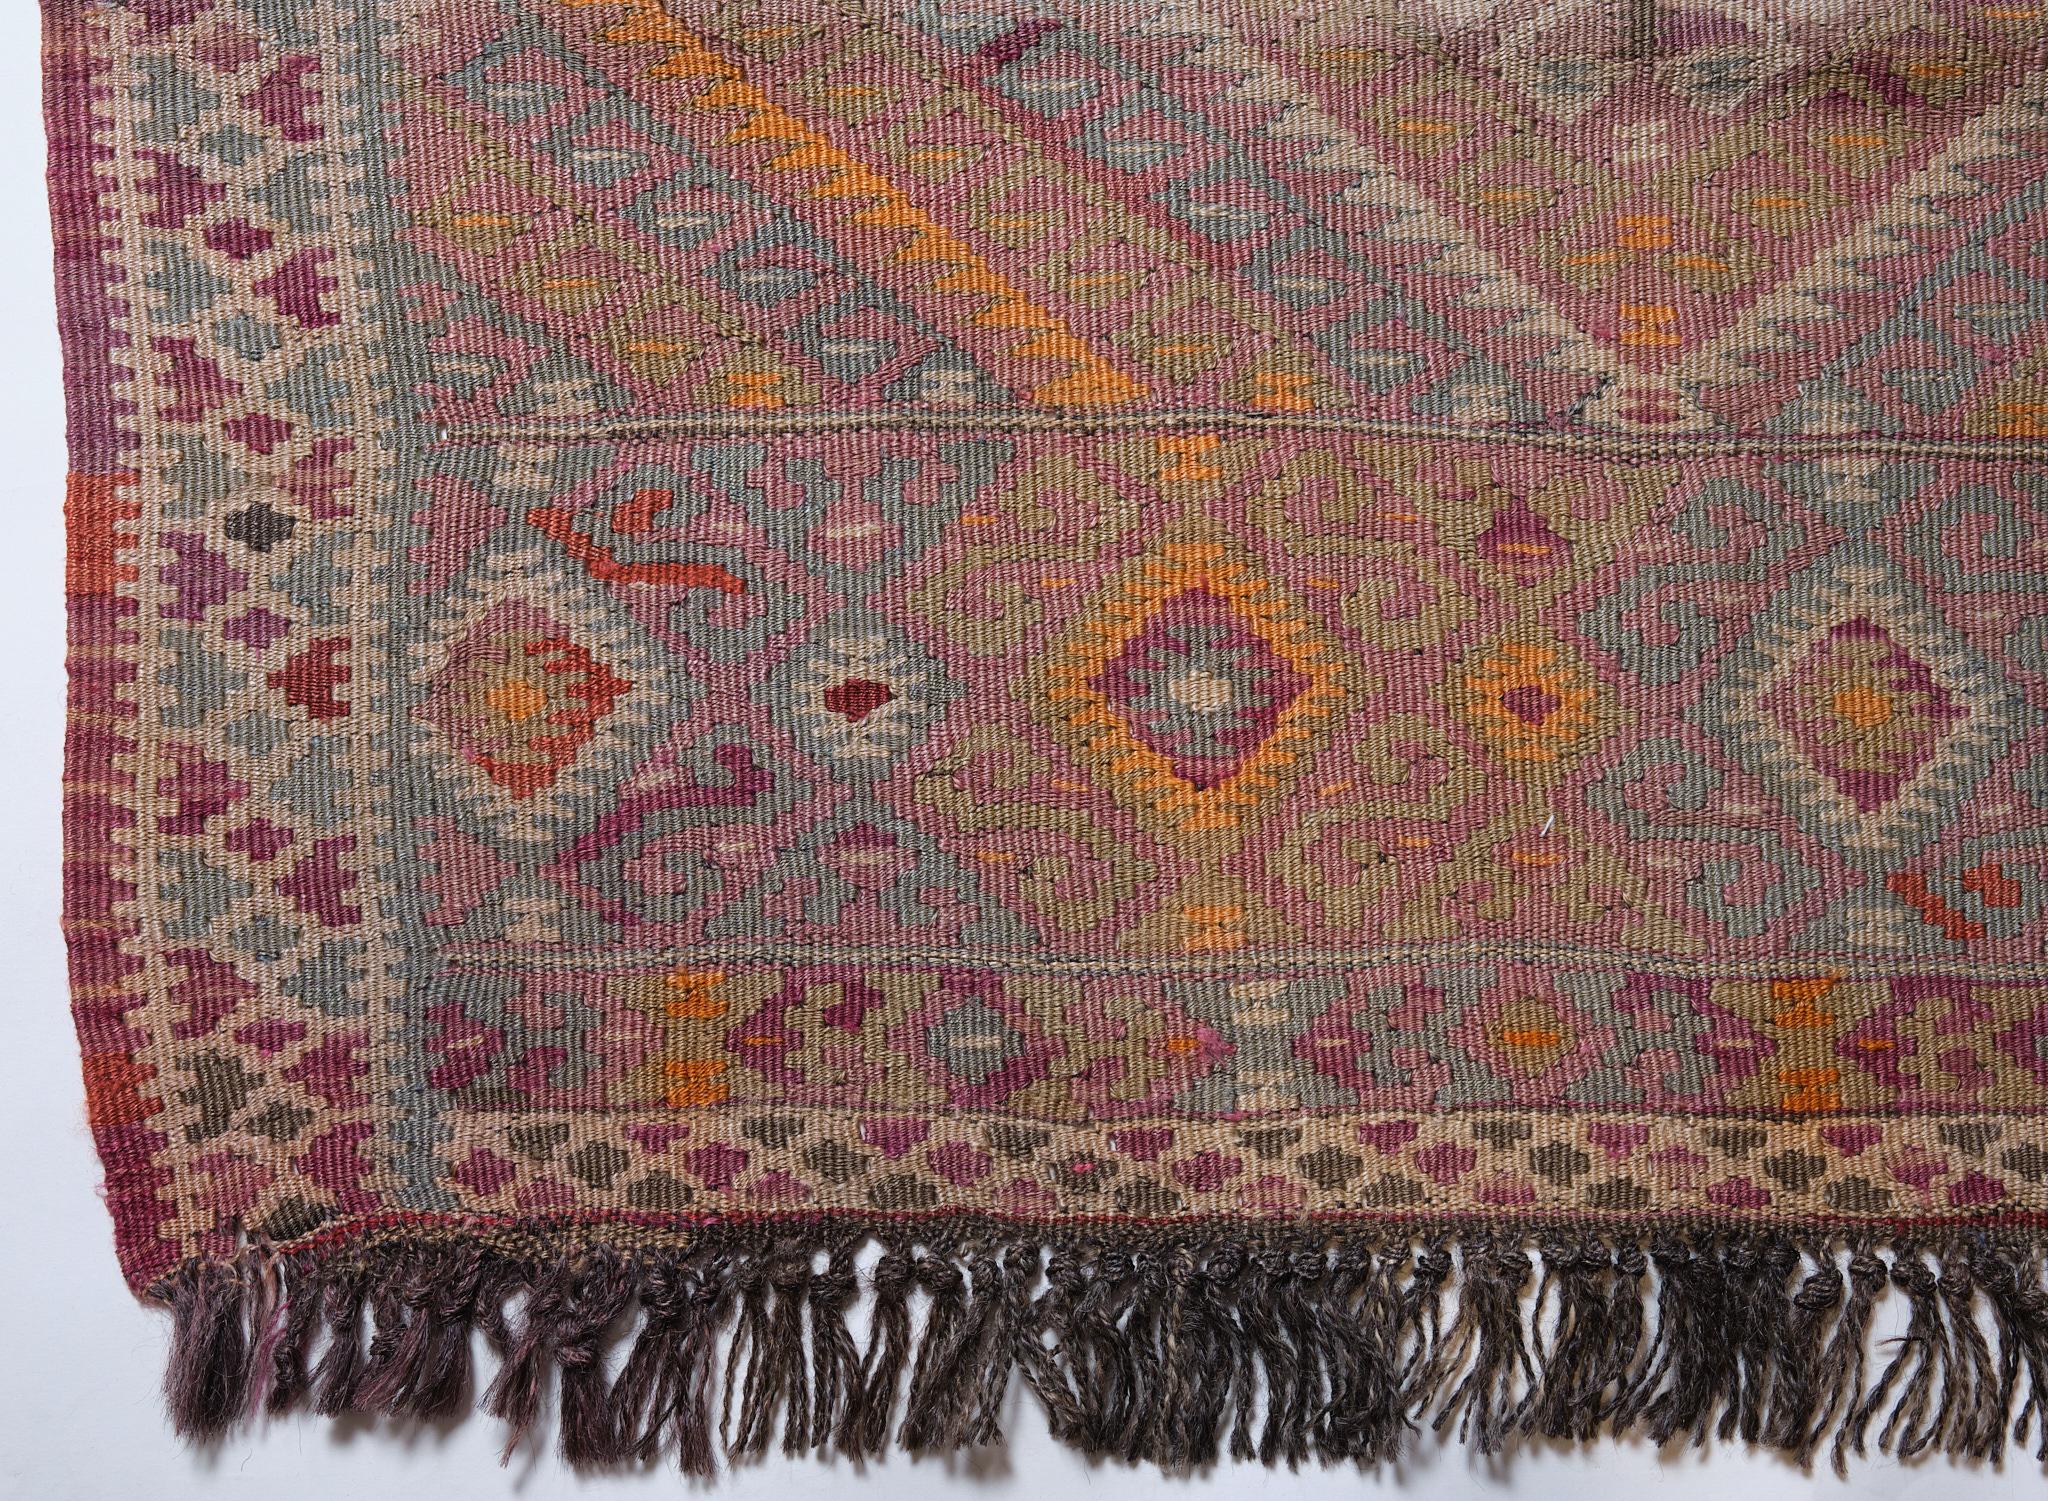 This is a Vintage Old Anatolian Kilim Rug from Turkey with a rare and beautiful color composition.

A long size old kilim with a width of about 1m and a length of about 3.5m can be placed not only in the living room but also in
the corridor